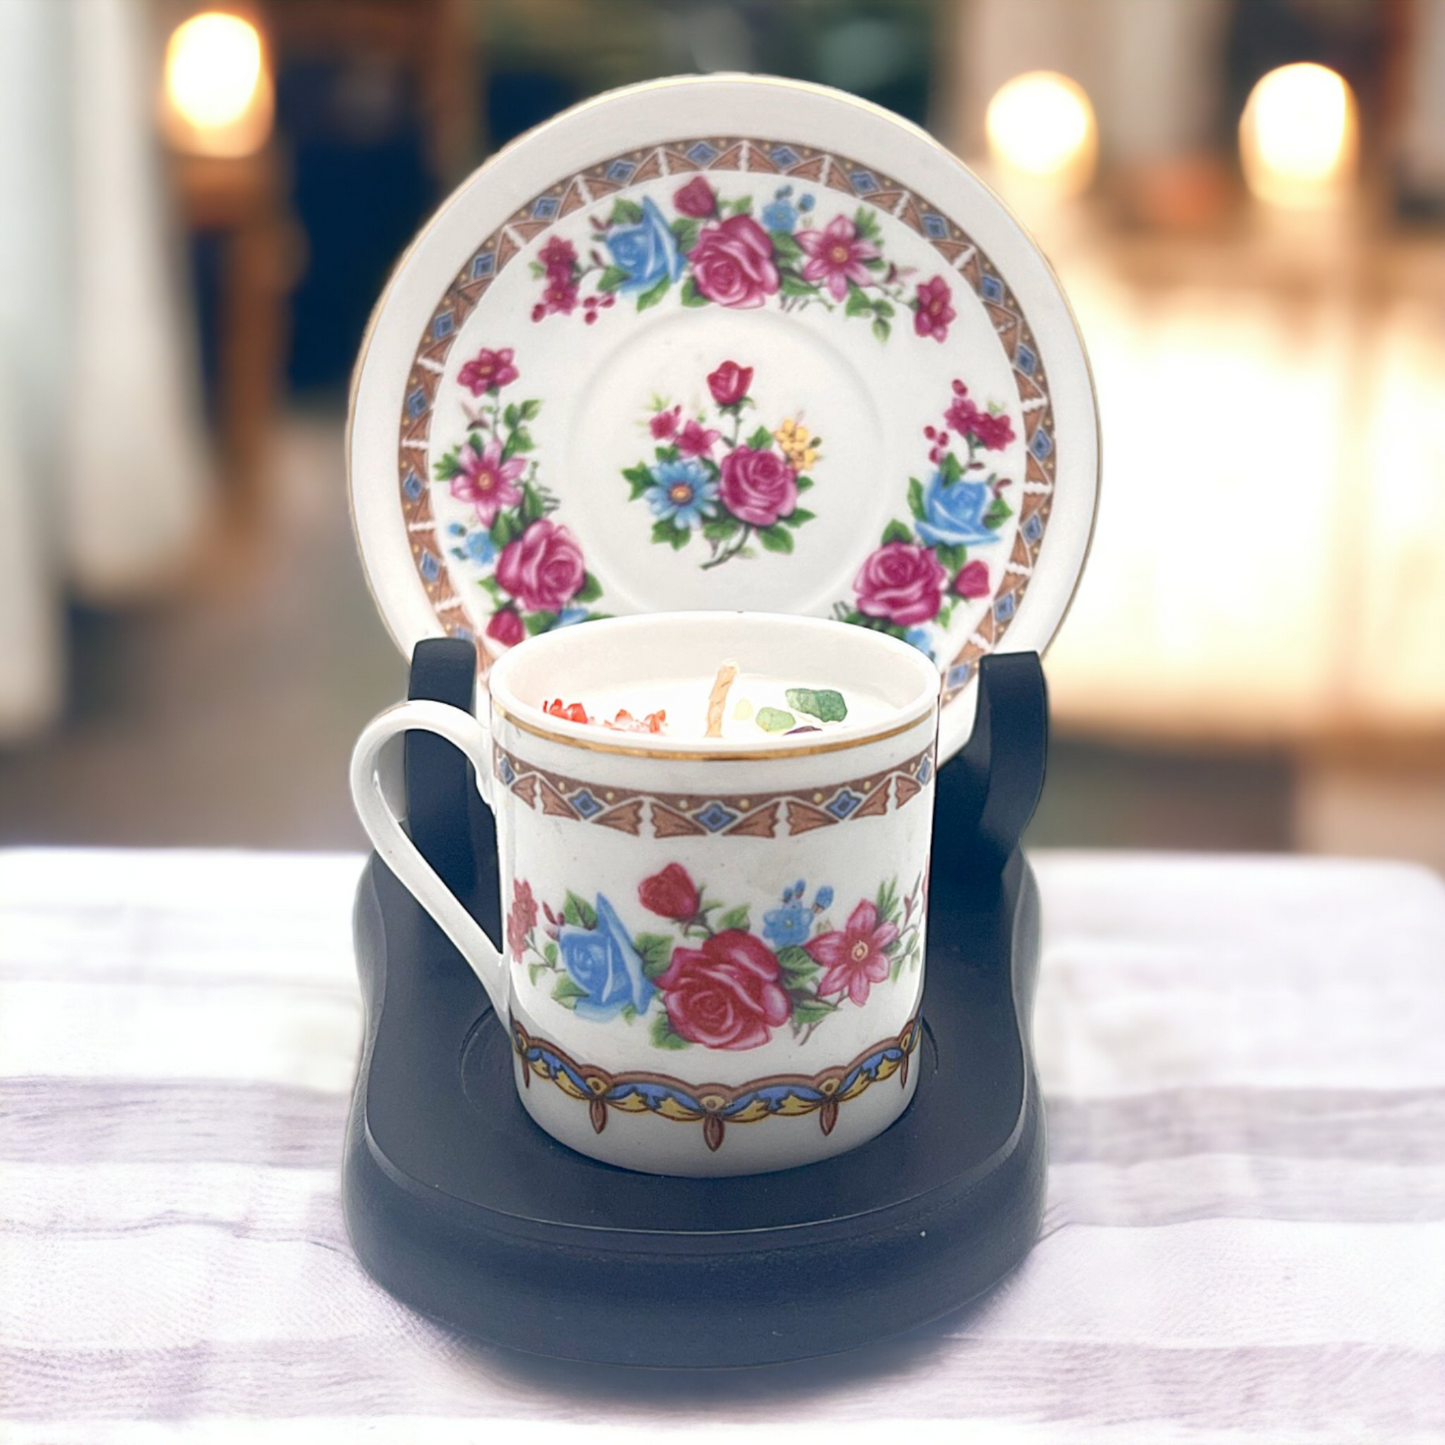 Chinese ZhongGuo Vintage Teacup Candle